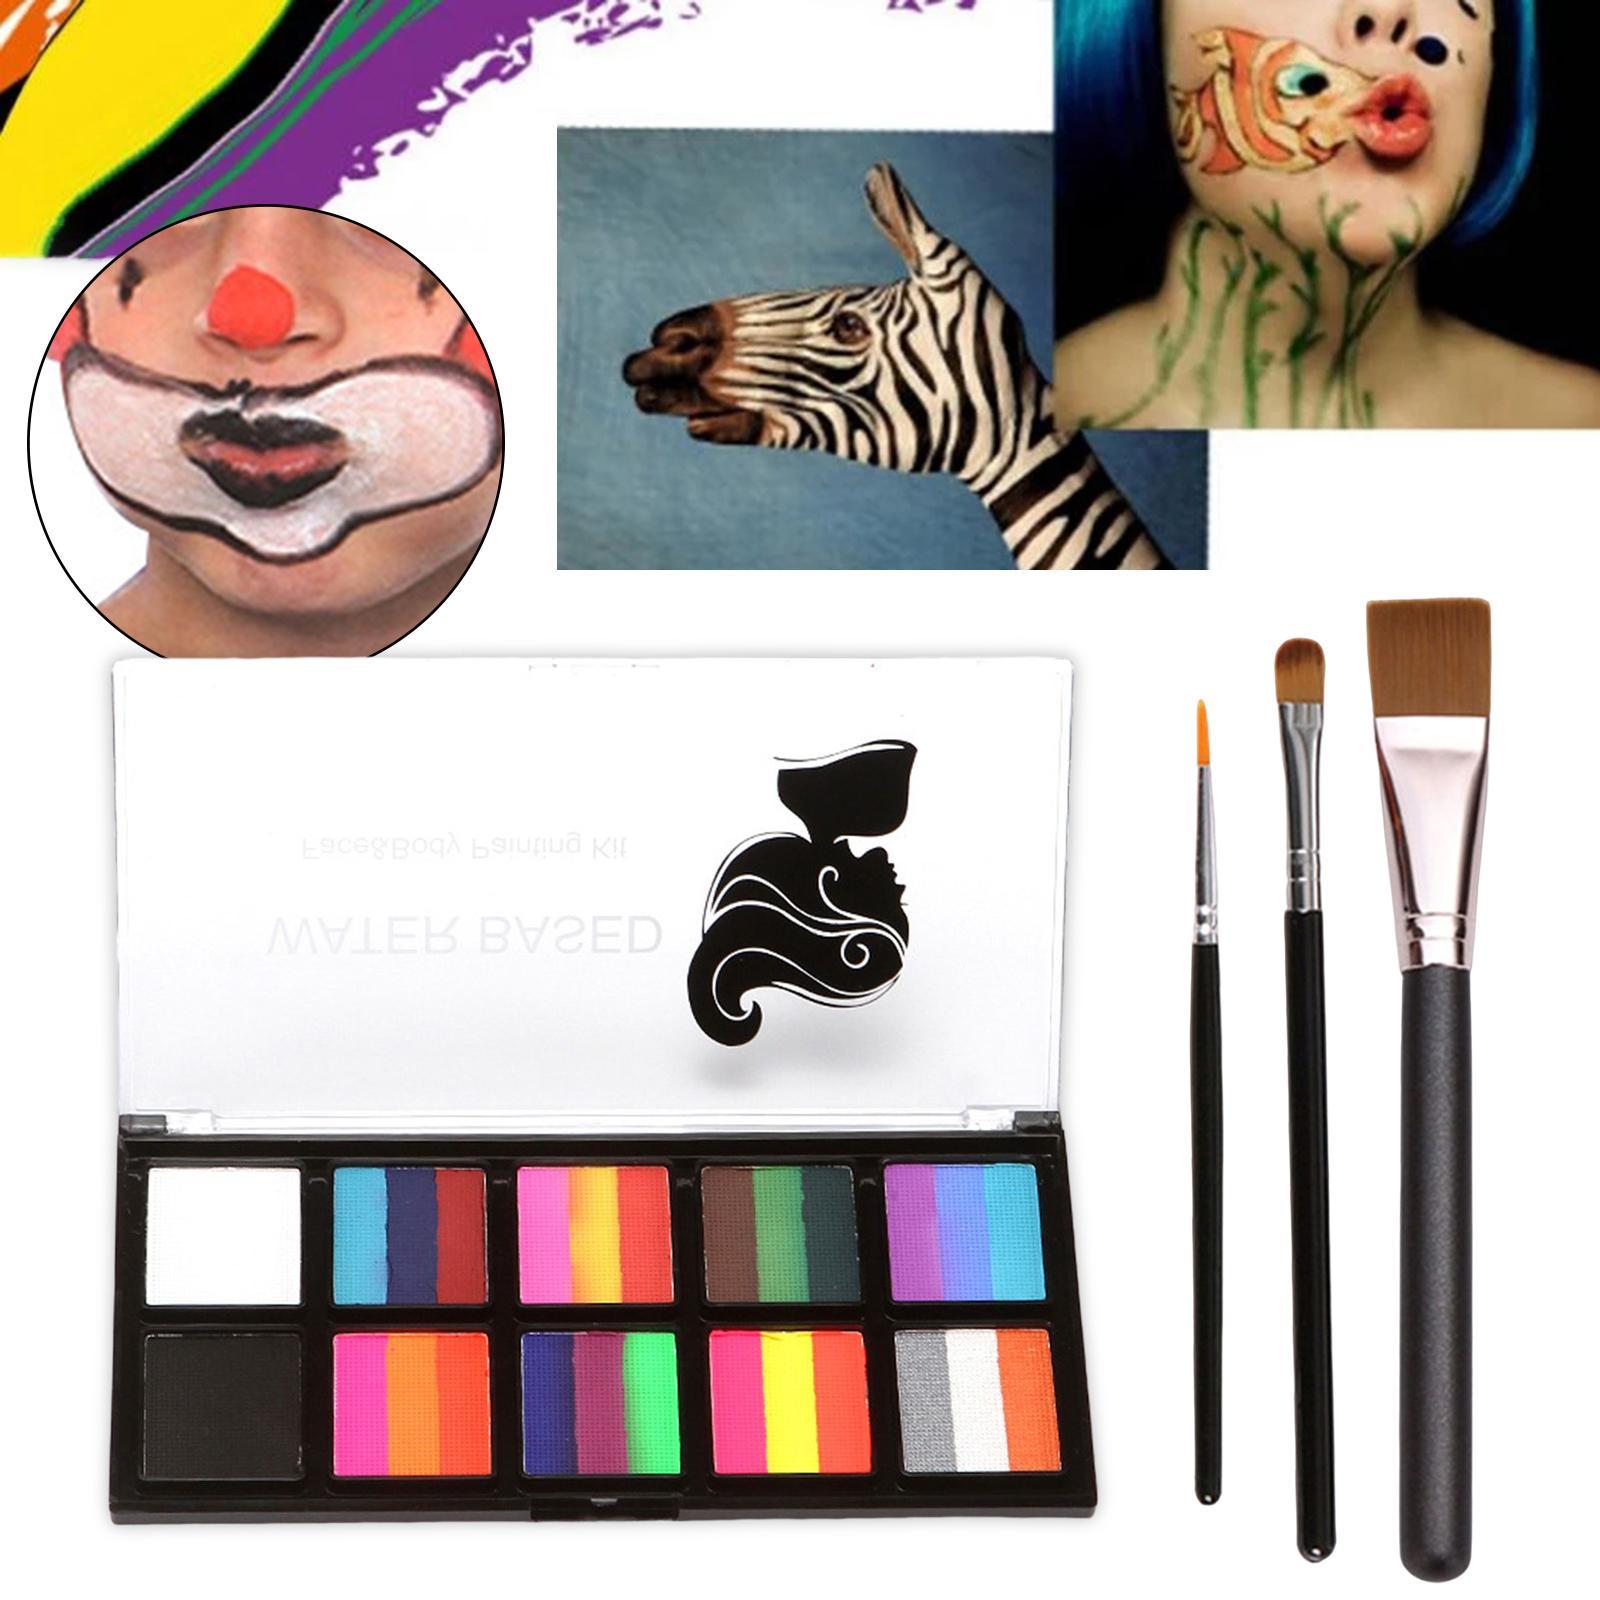 Body Paint Makeup Kit for Costume Halloween Kids Adults